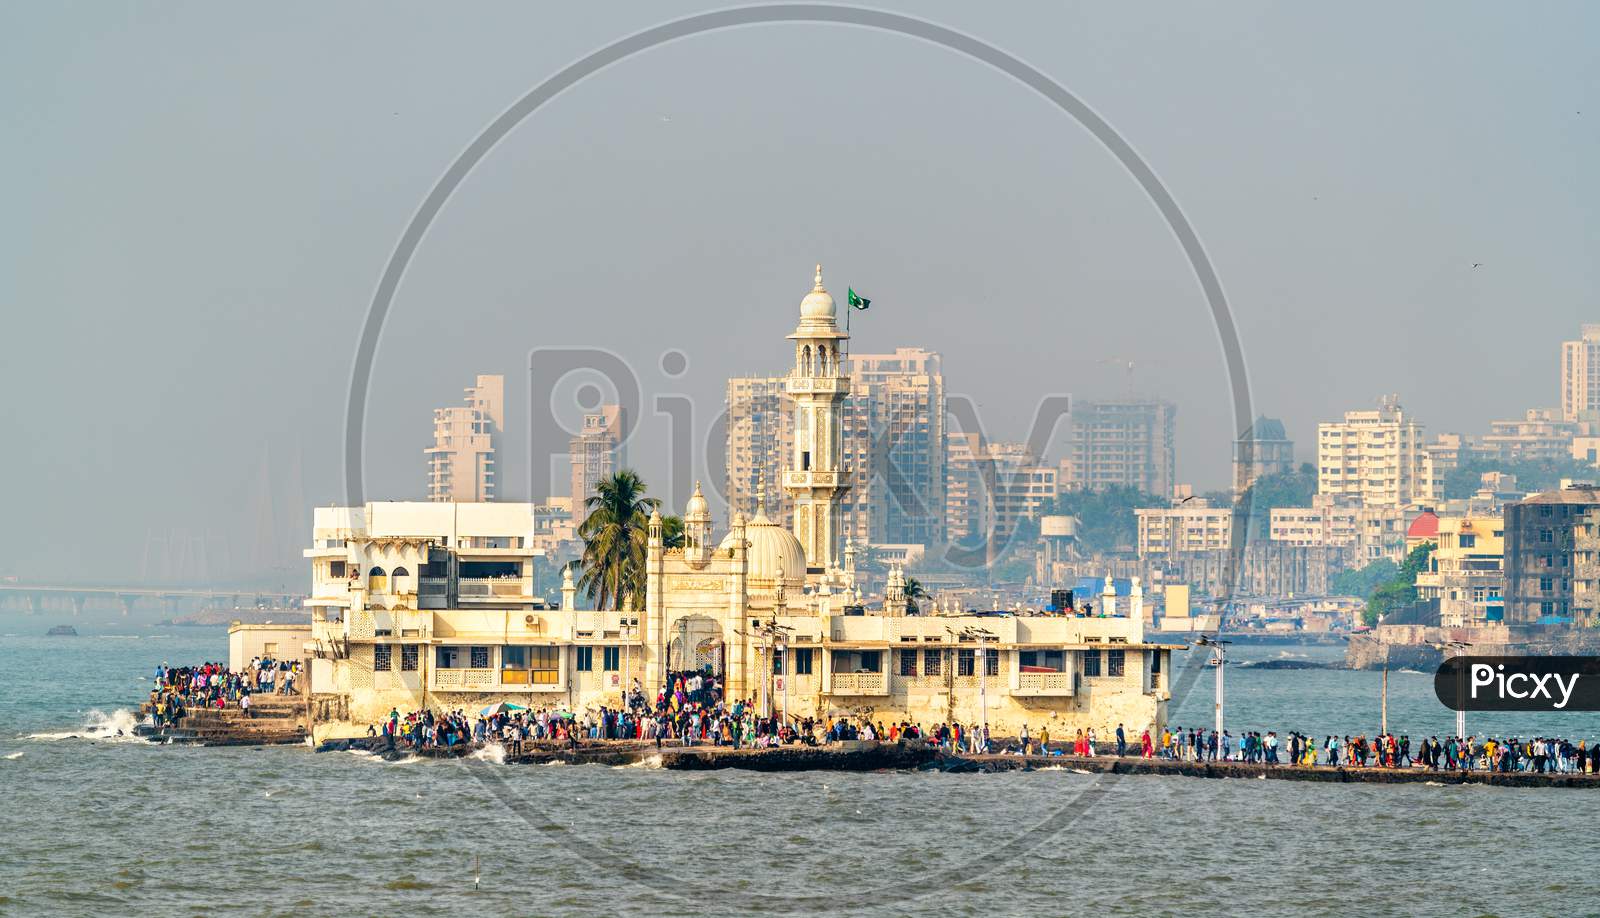 The Haji Ali Dargah, A Famous Tomb And A Mosque In Mumbai, India